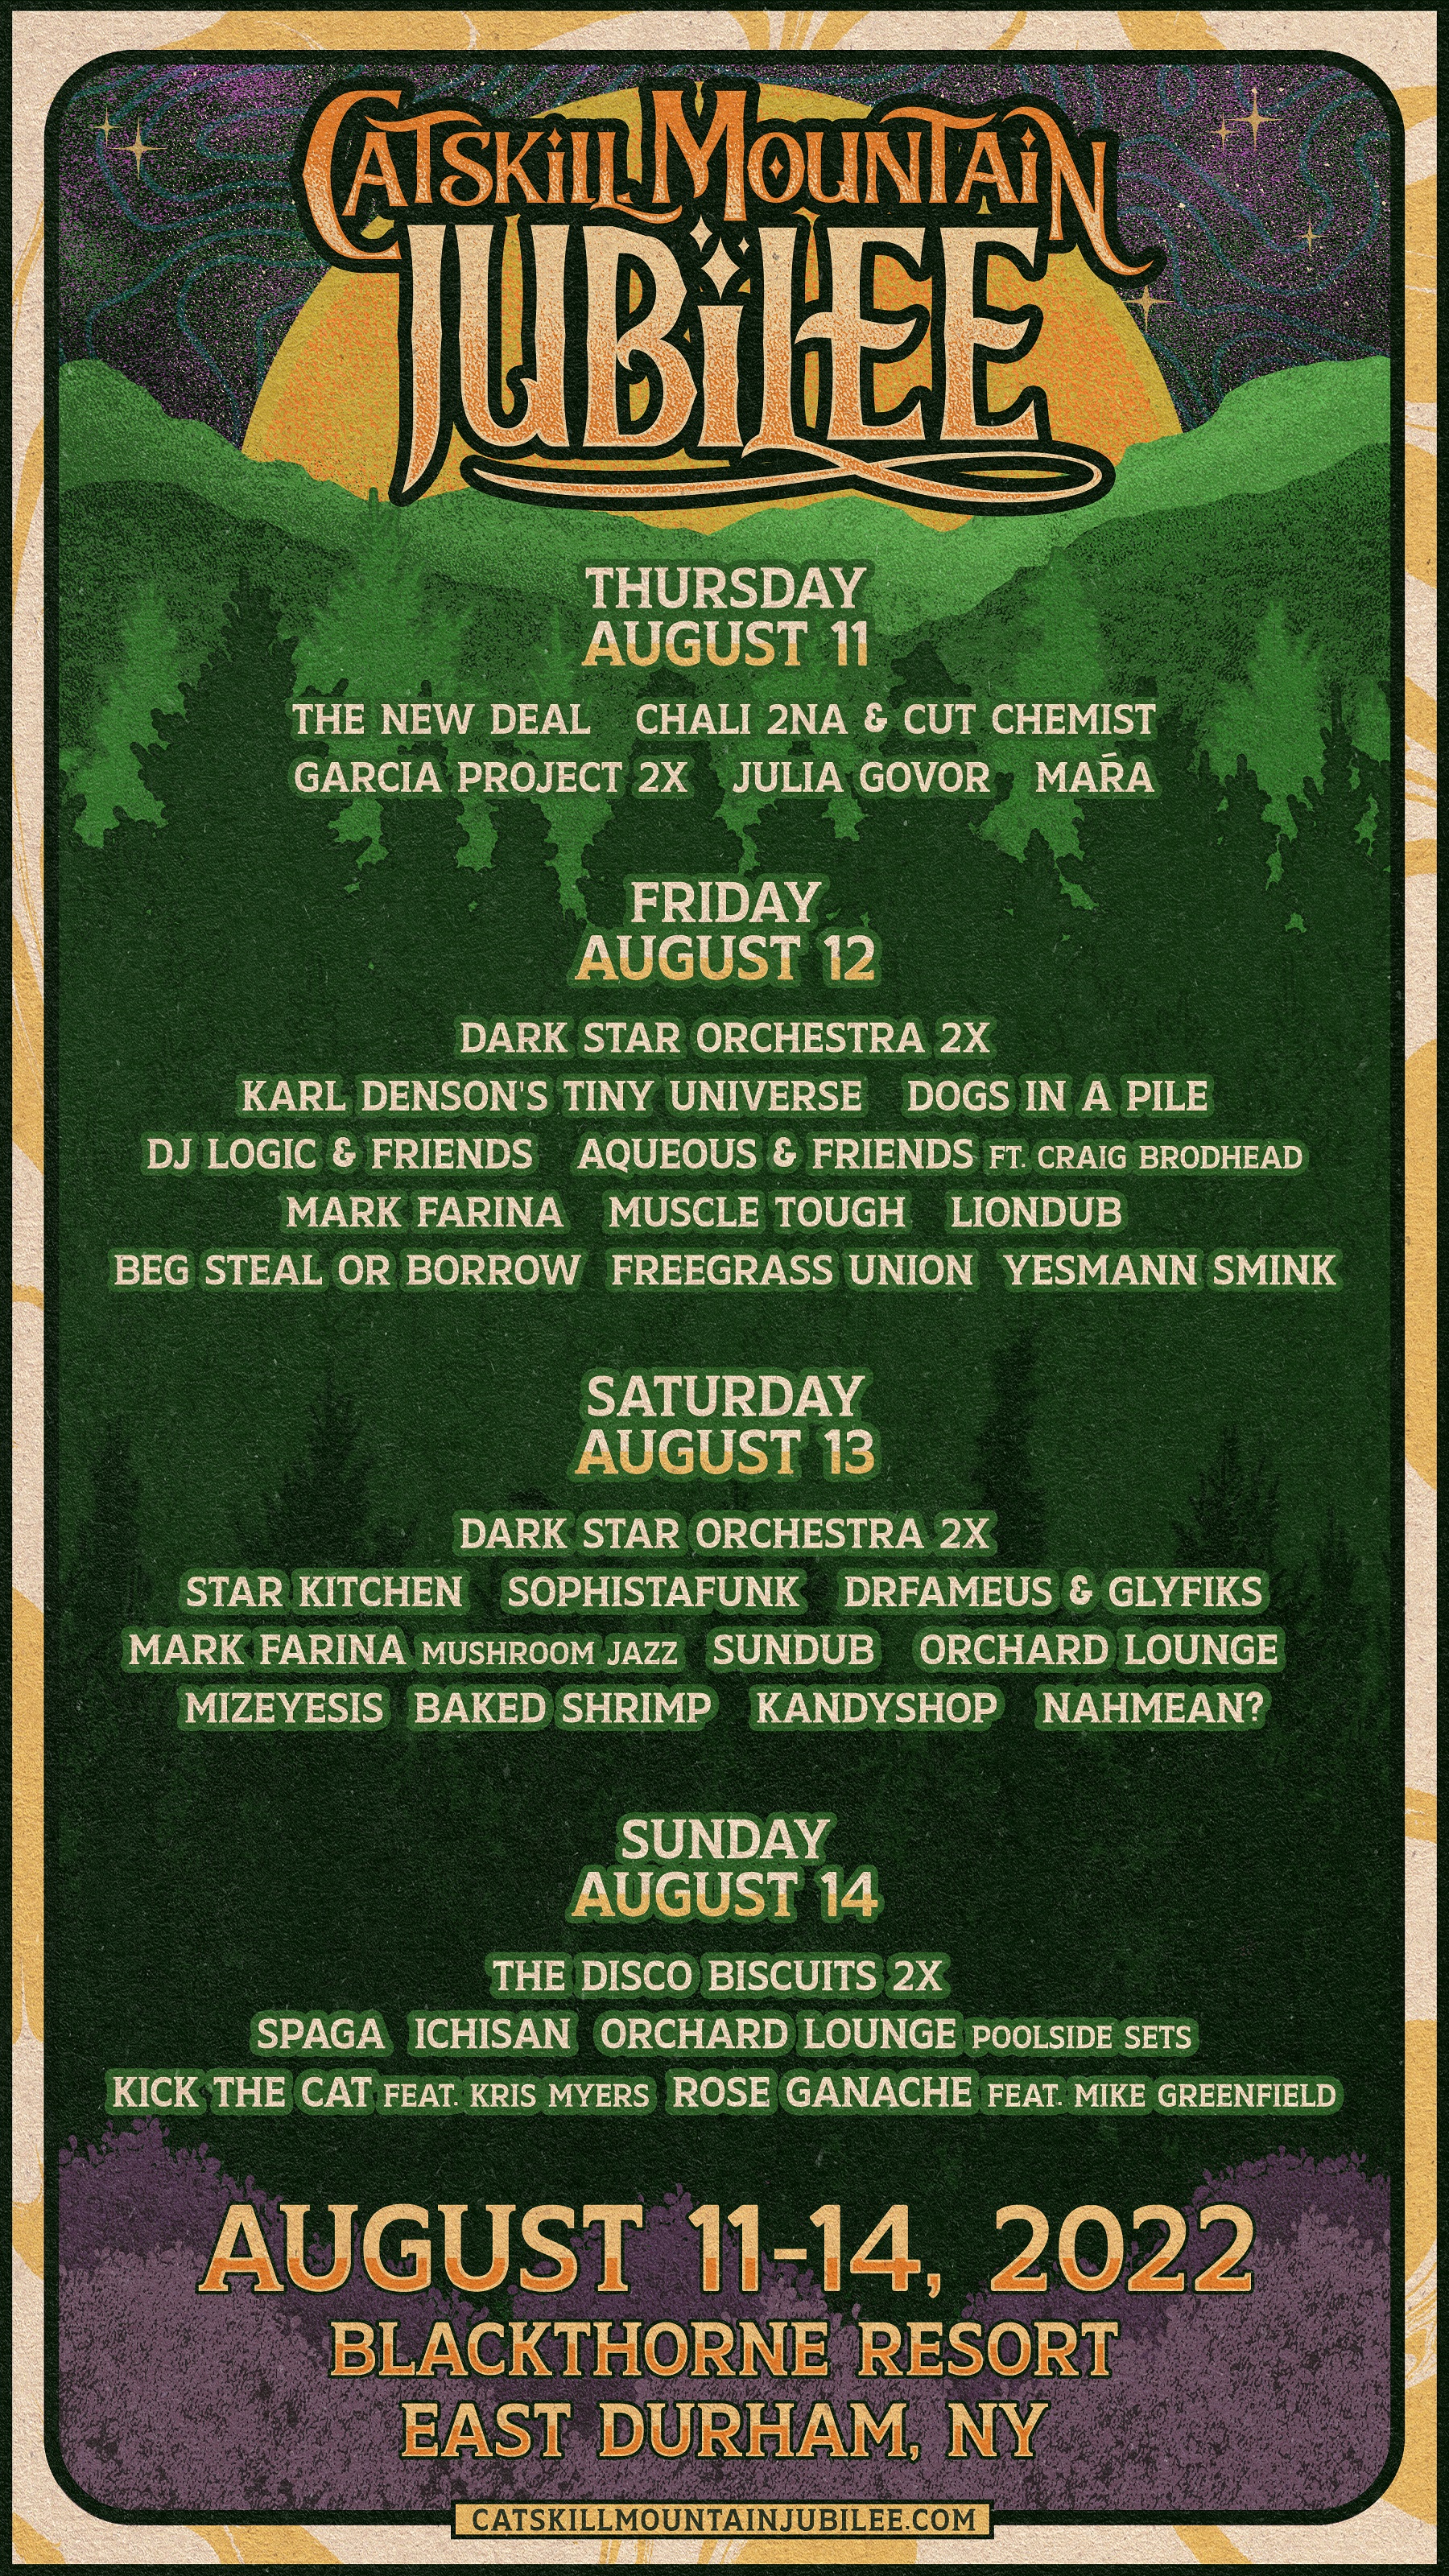 CATSKILL MOUNTAIN JUBILEE FT DARK STAR ORCHESTRA, THE DISCO BISCUITS